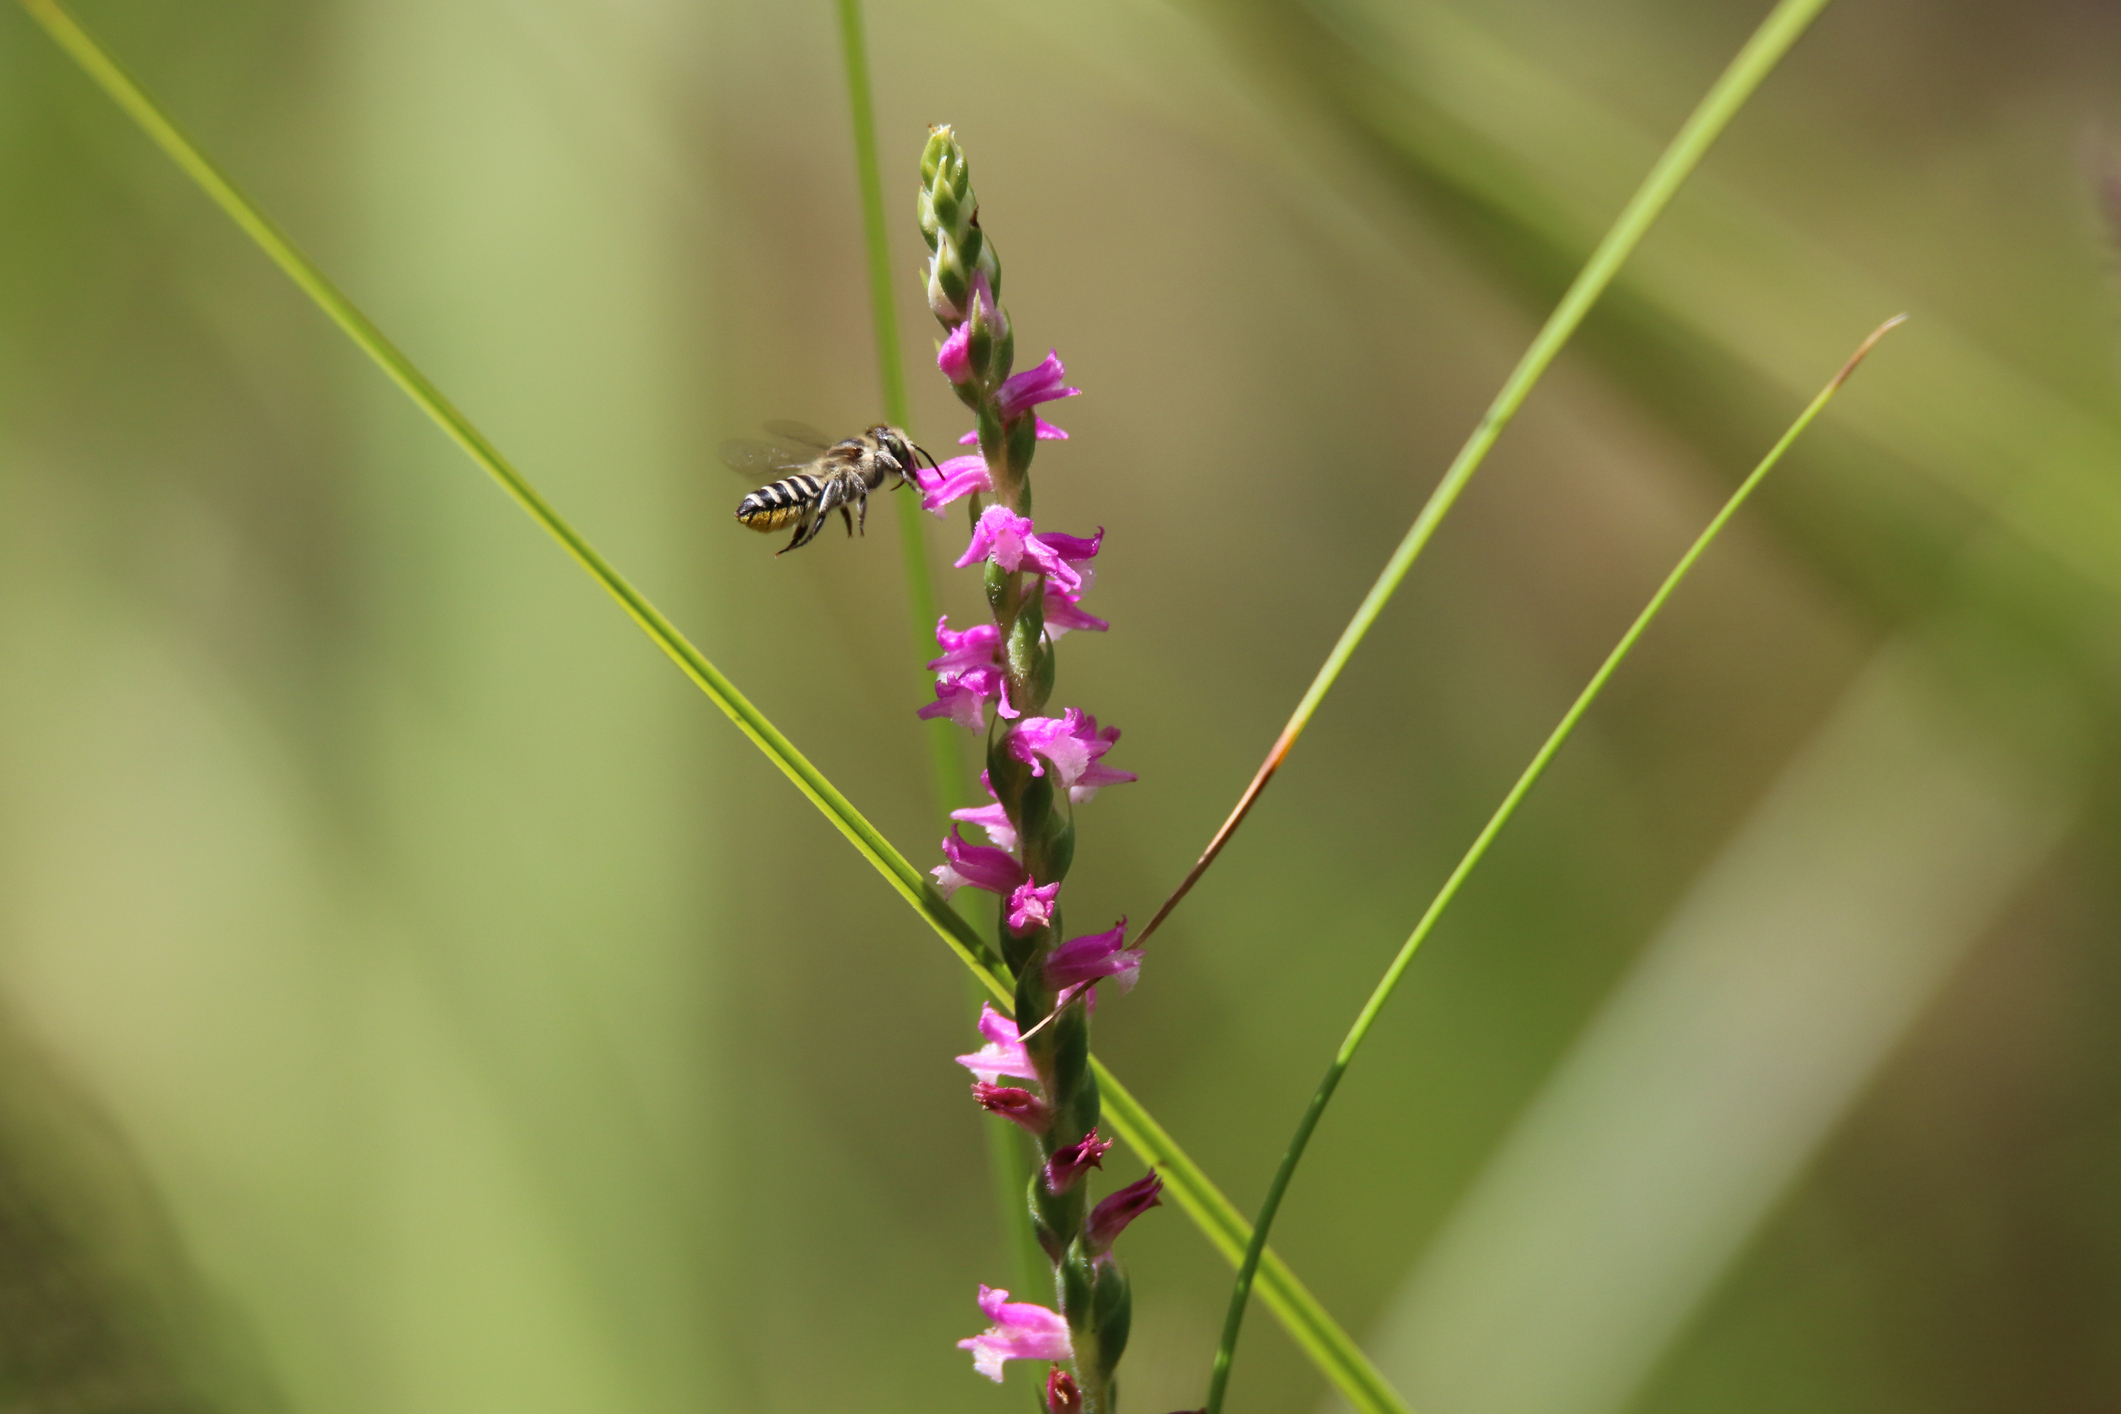 Leaf cutter bee pollinating Spiranthes australis